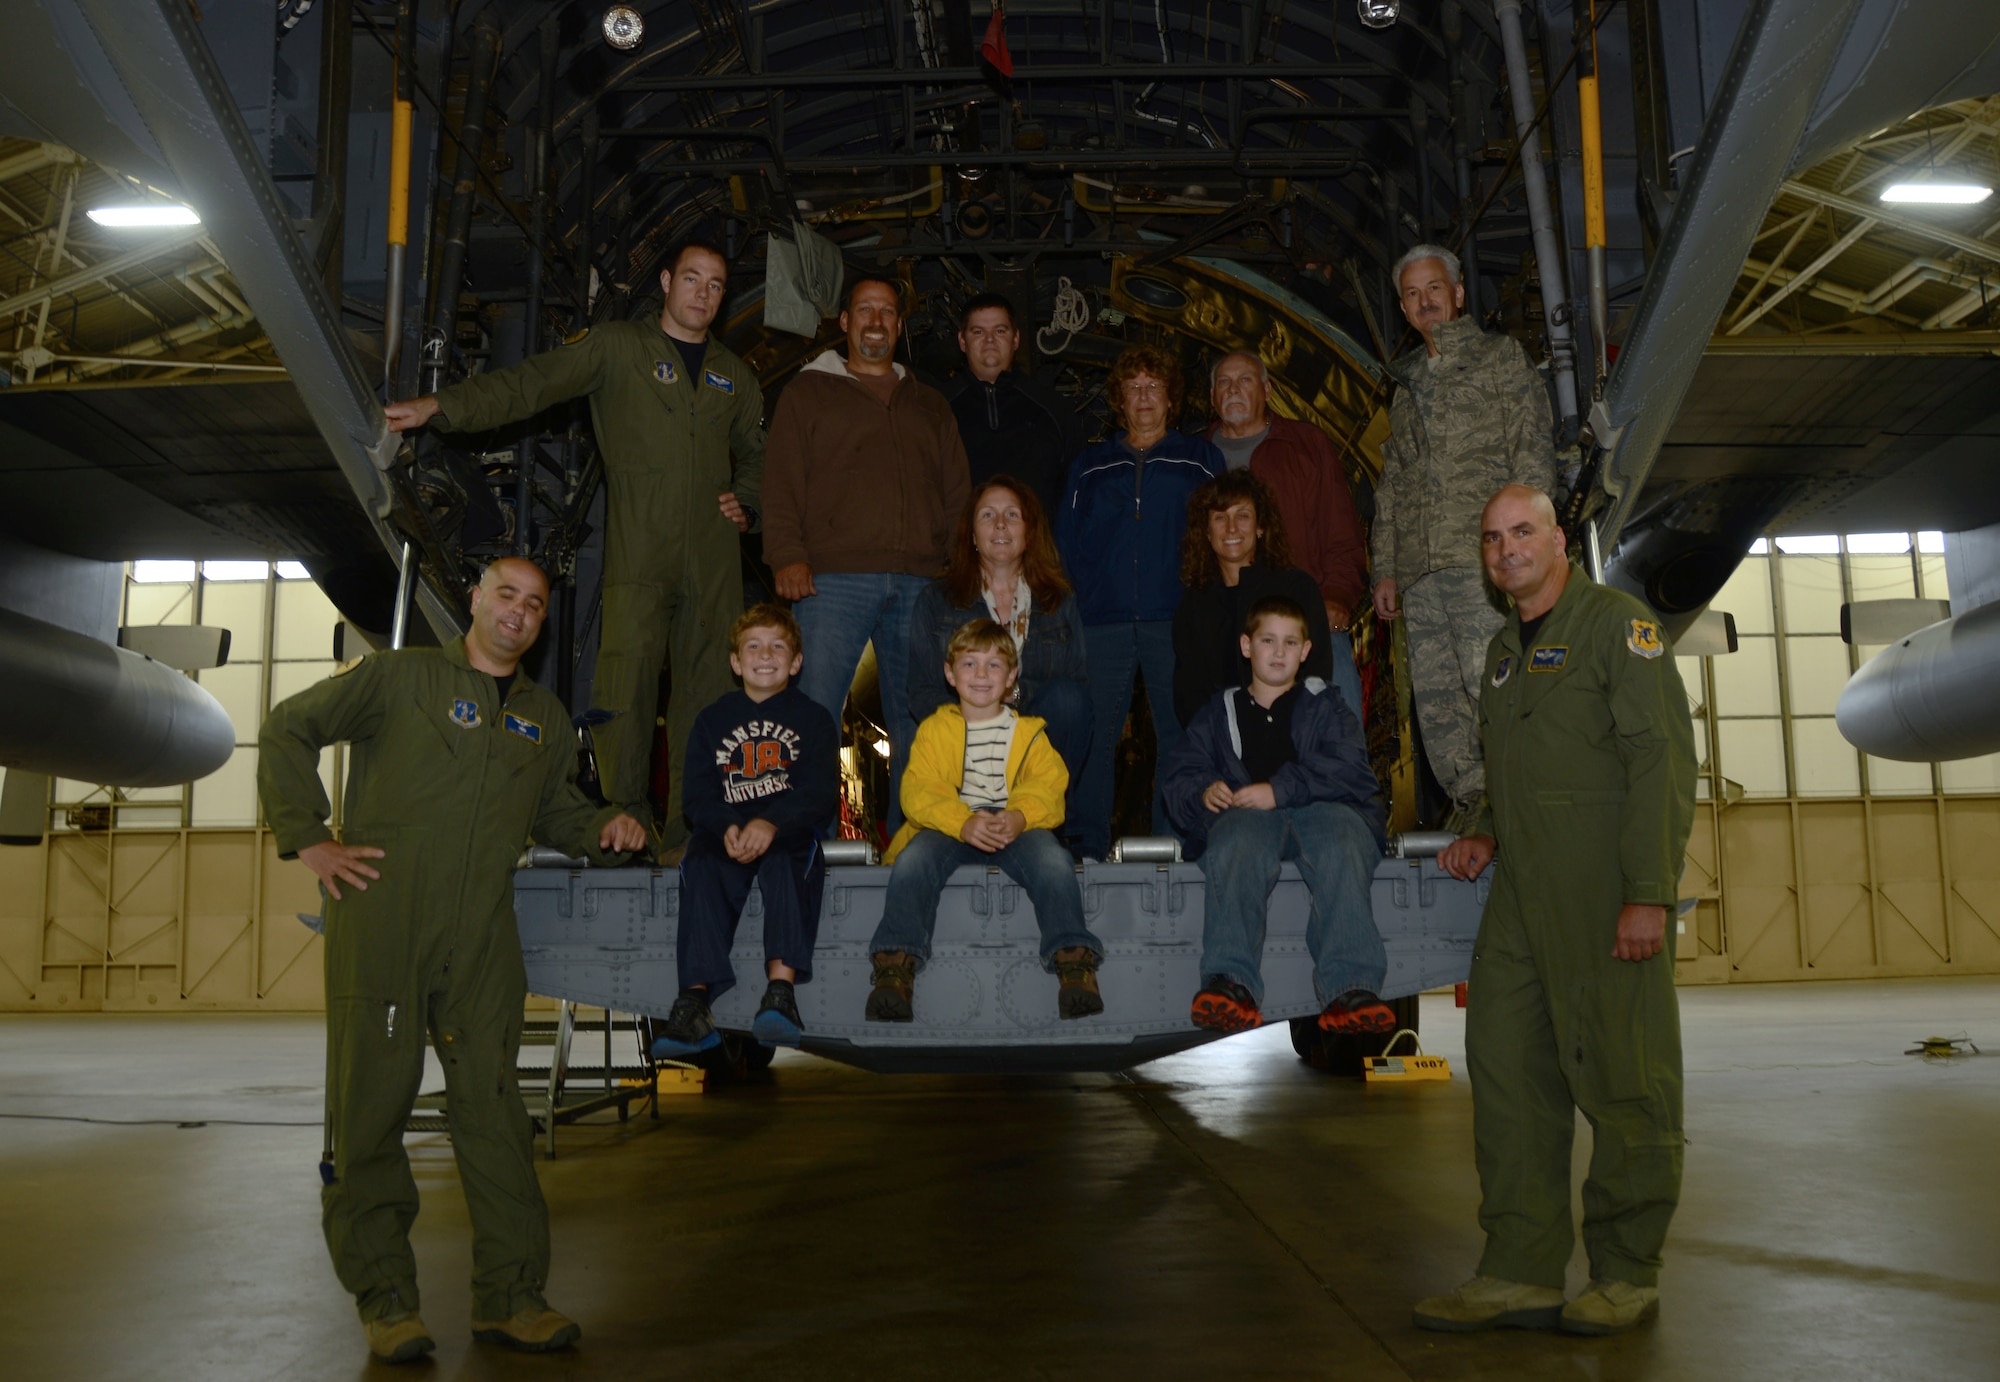 Employees of Fillmore Express Inc. and their families pose with their 103rd Airlift Wing tour guides (bottom left, Tech. Sgt. Tufic Paone; bottom right, Master Sgt. Bryan Watson; top left, 1st Lt. Alan Bolduc; and top right, Col. Frederick Miclon) after completing their tour of a C-130H Hercules aircraft at Bradley Air National Guard Base, East Granby, Conn., Oct. 4, 2014. Employees of Fillmore and their families were invited on a base tour to thank them for the signs they posted outside of their business supporting the Airmen of Bradley Air National Guard Base. (Air National Guard photo by Senior Airman Jennifer Pierce)